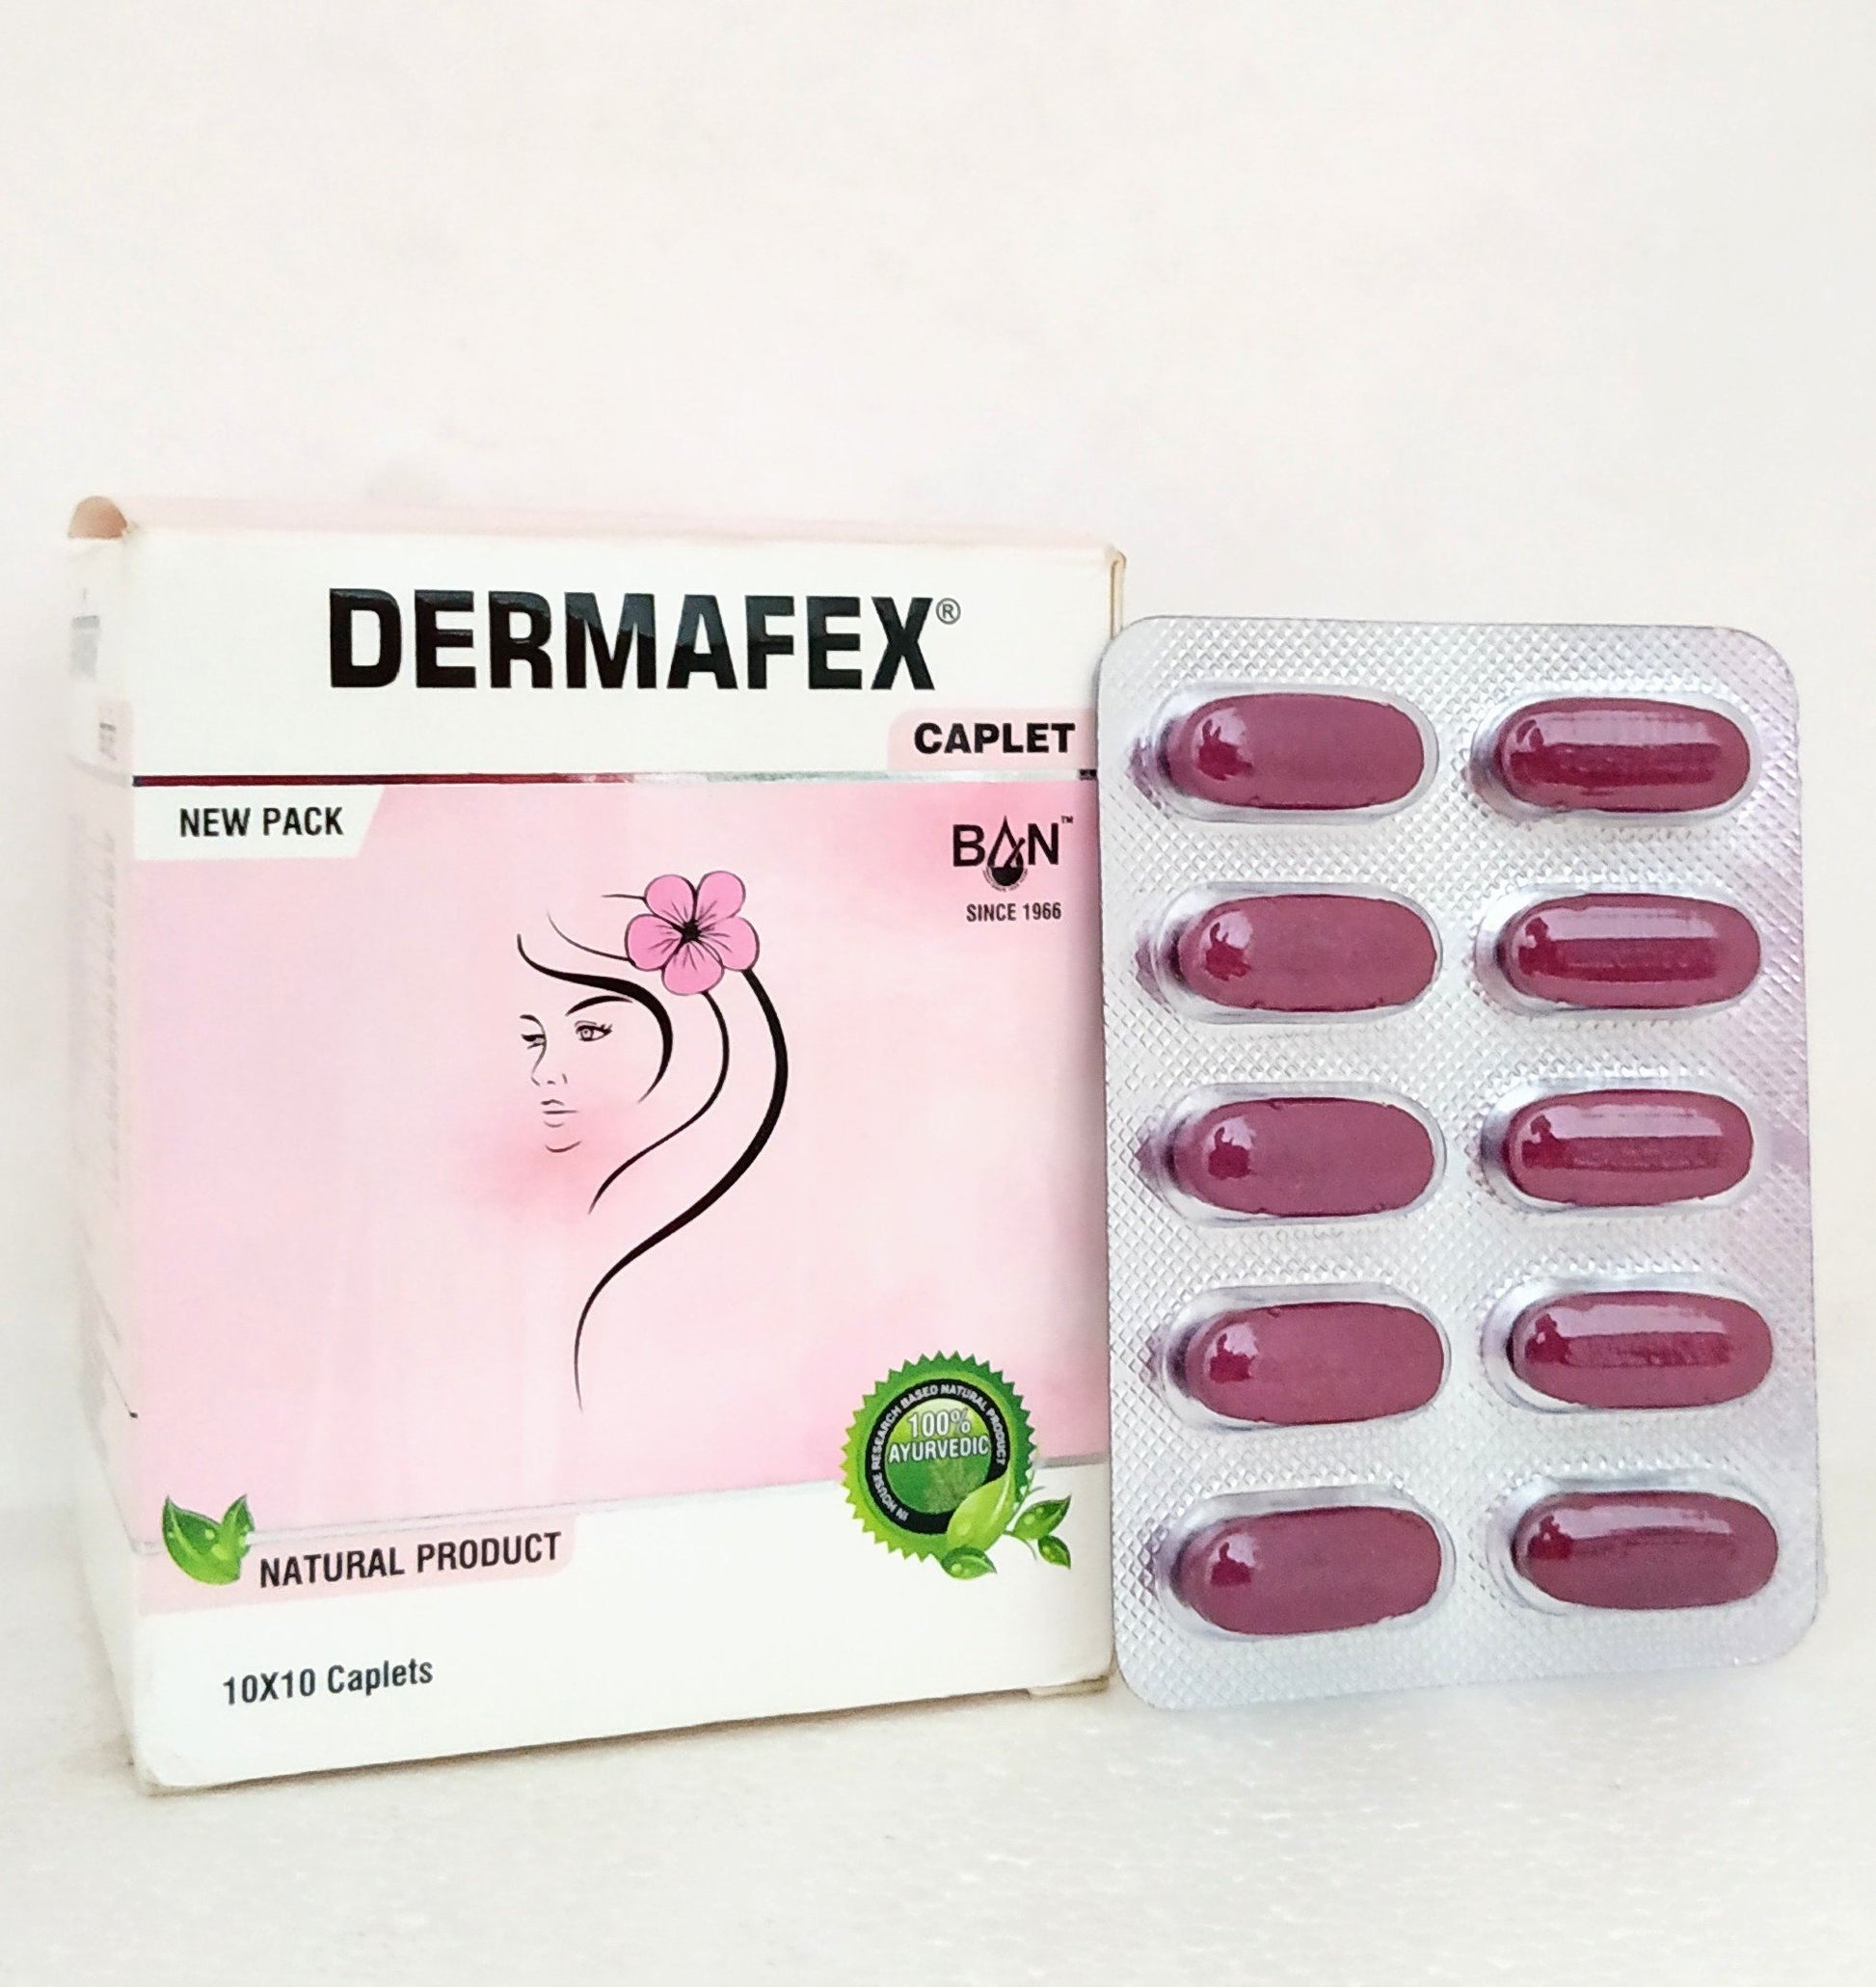 Shop Banlab Dermafex 10Caplets at price 57.50 from Banlabs Online - Ayush Care